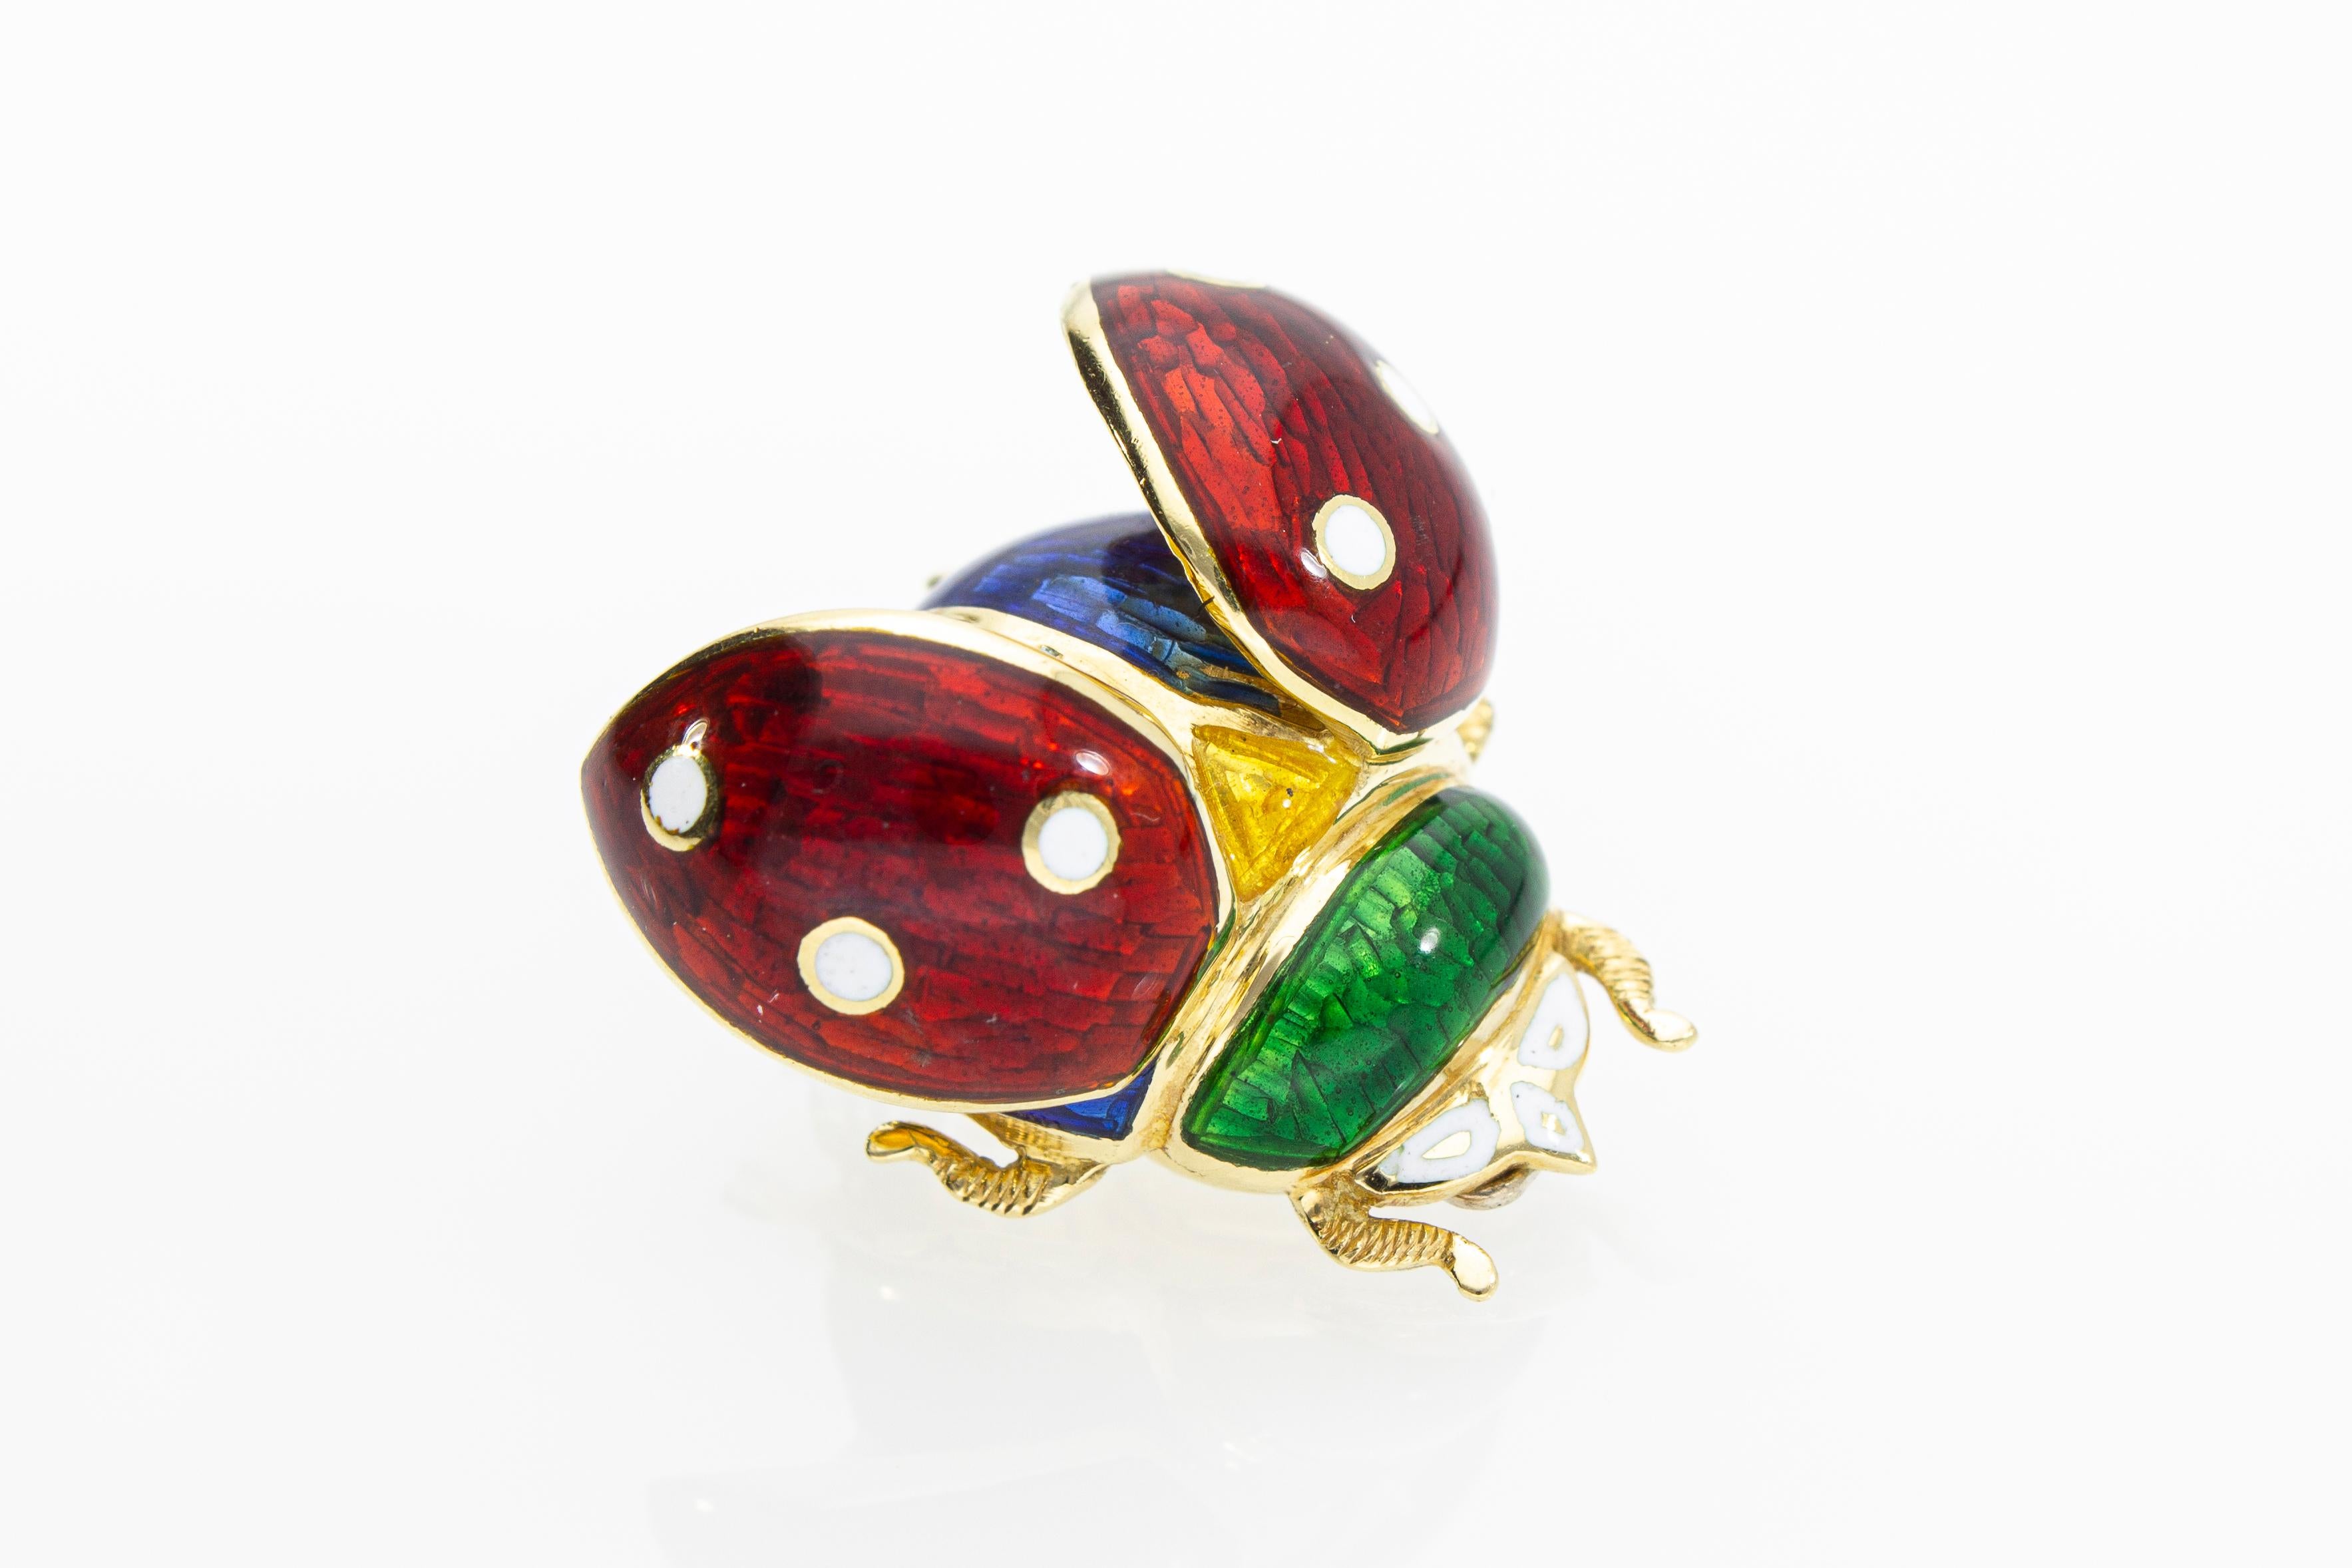 The pendant in the shape of a ladybug with open wings, can be worn both as a pendant and as a brooch. The ladybug is decorated with transparent enamels of various colors. 
Its manufacture is performed by a company of Italian craftsmanship